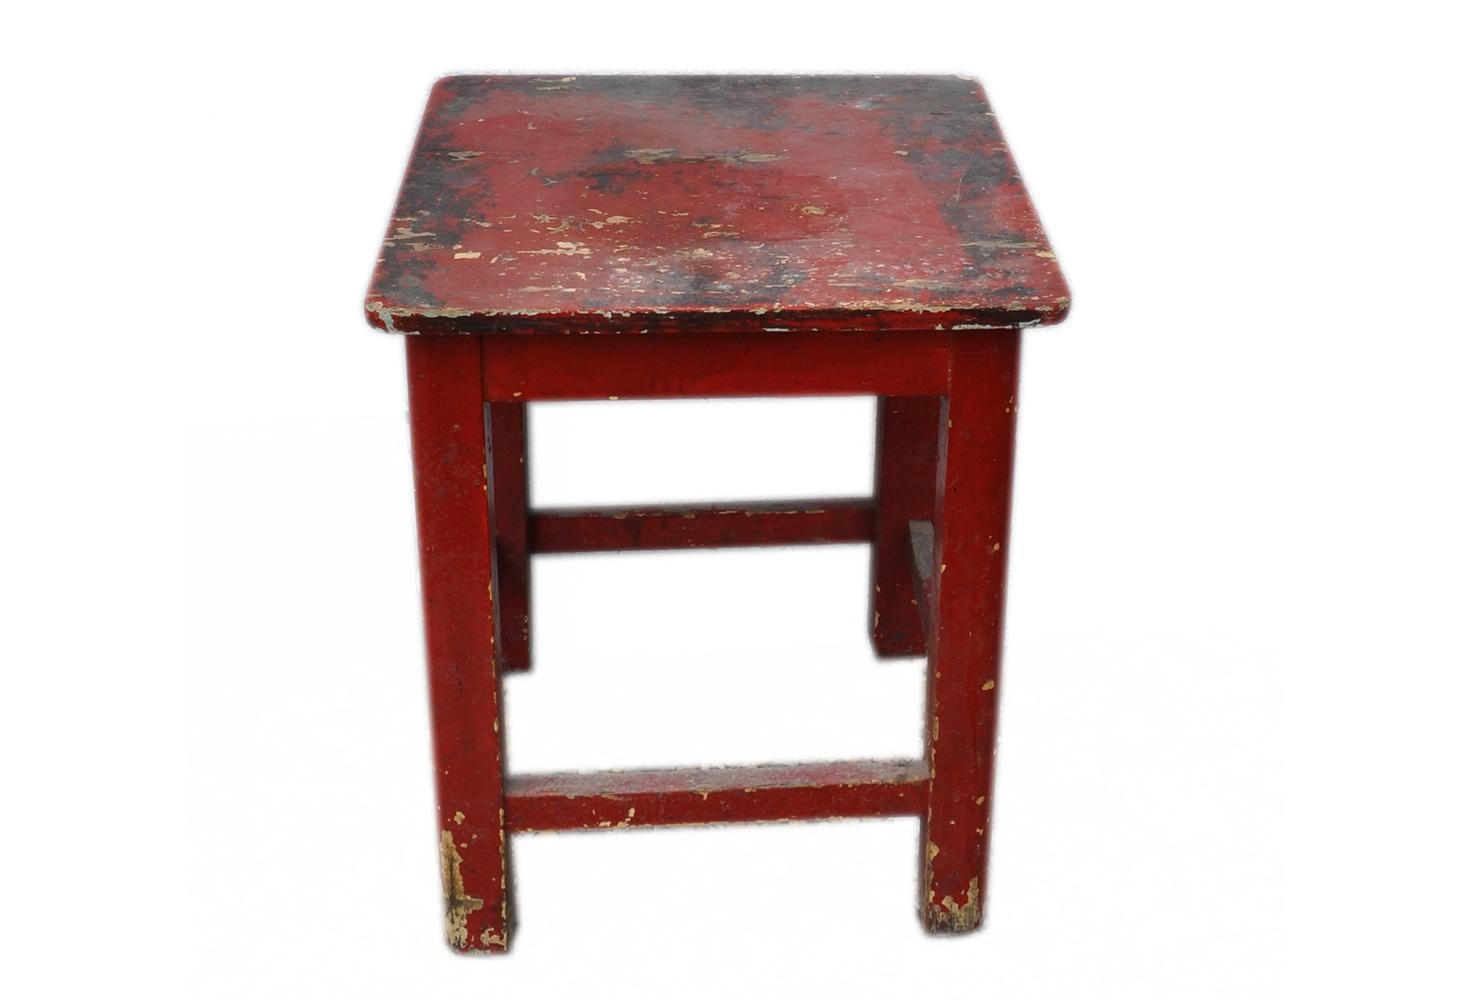 Red stool, 1920s.
This is a rectangular stool that once were used in a country house.
This is in a tarnished condition with wonderful patina and worn with tons of charm.